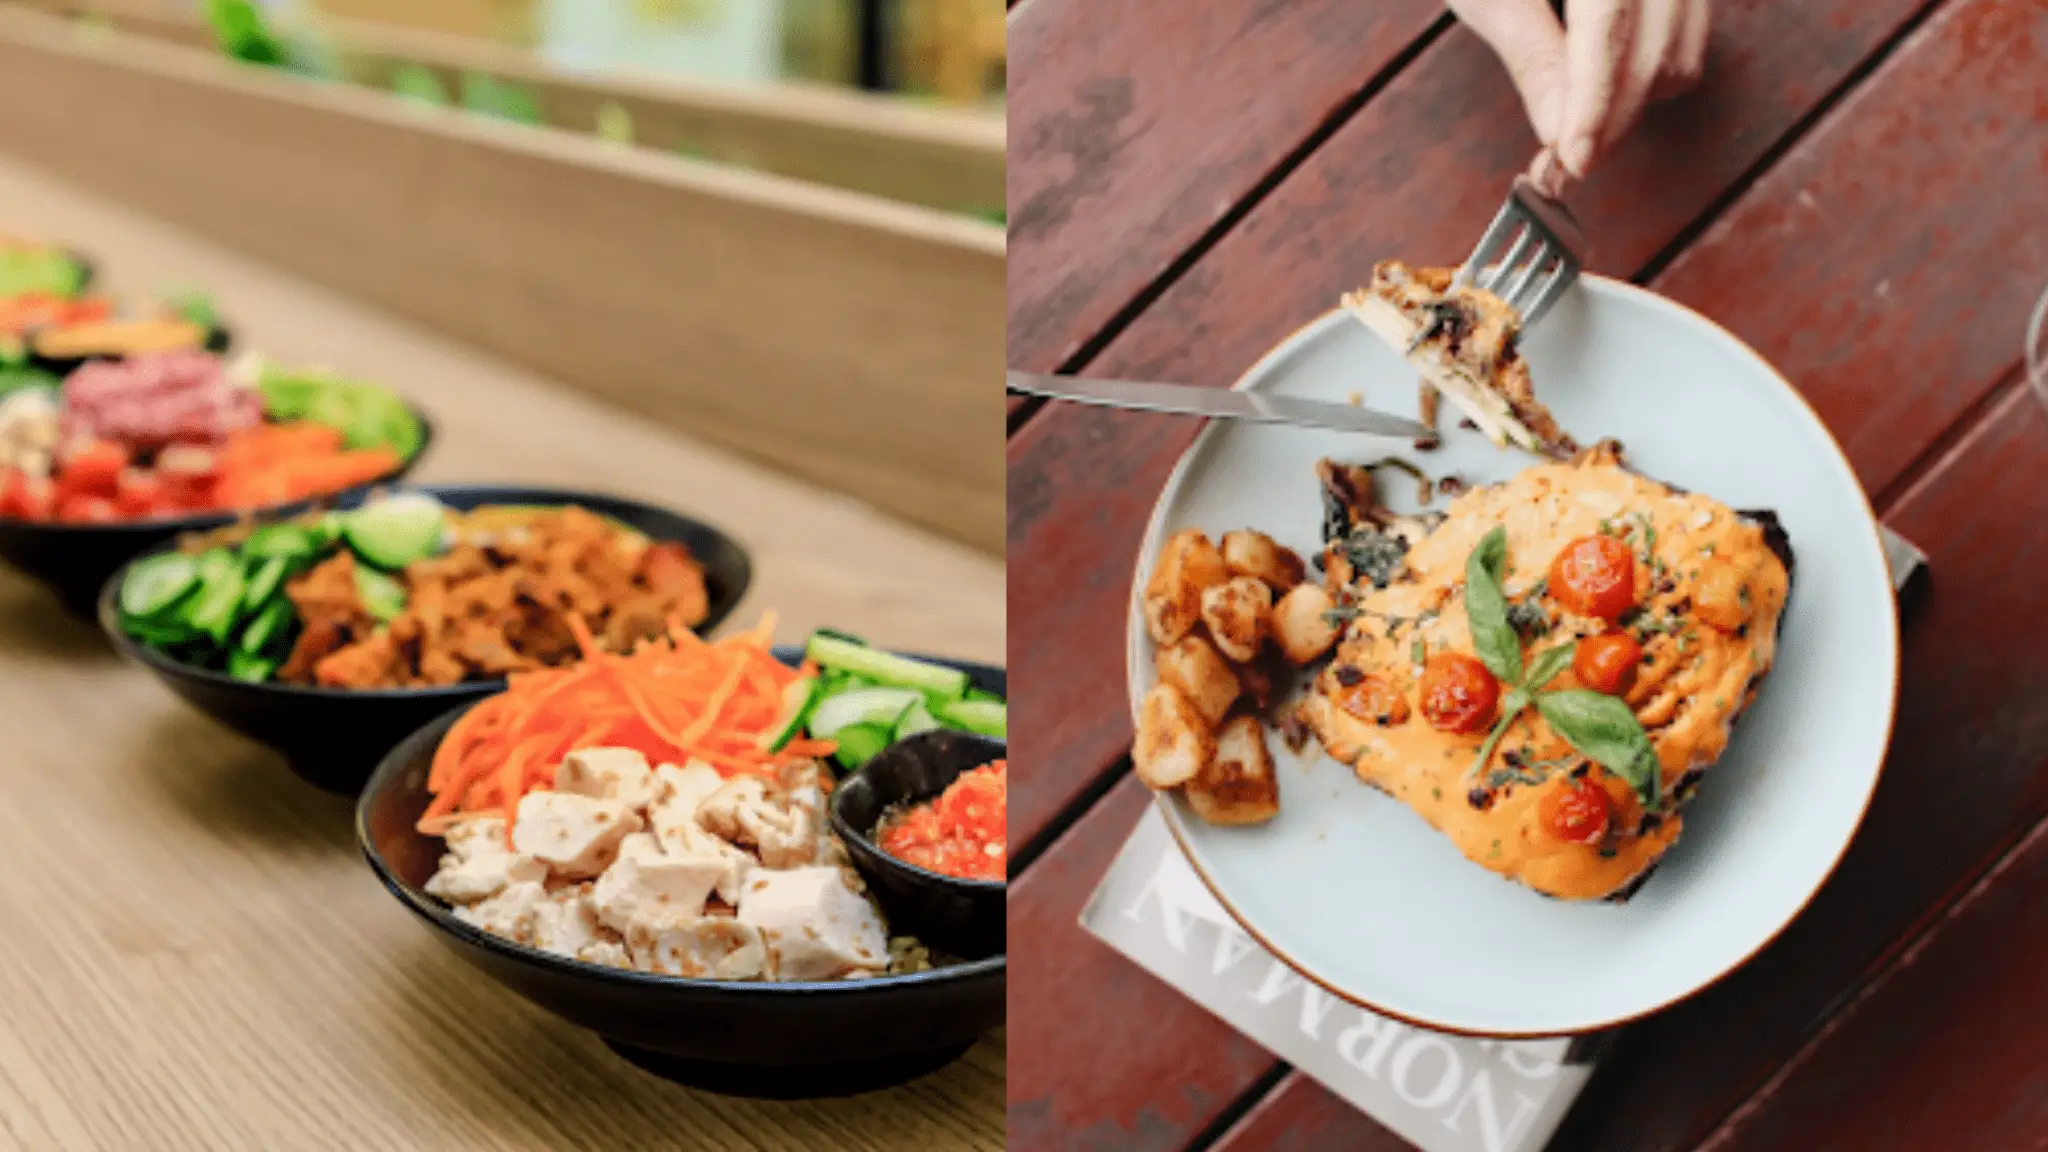 5 Keto-Friendly Restaurants in Singapore For All Your Keto Diet Needs